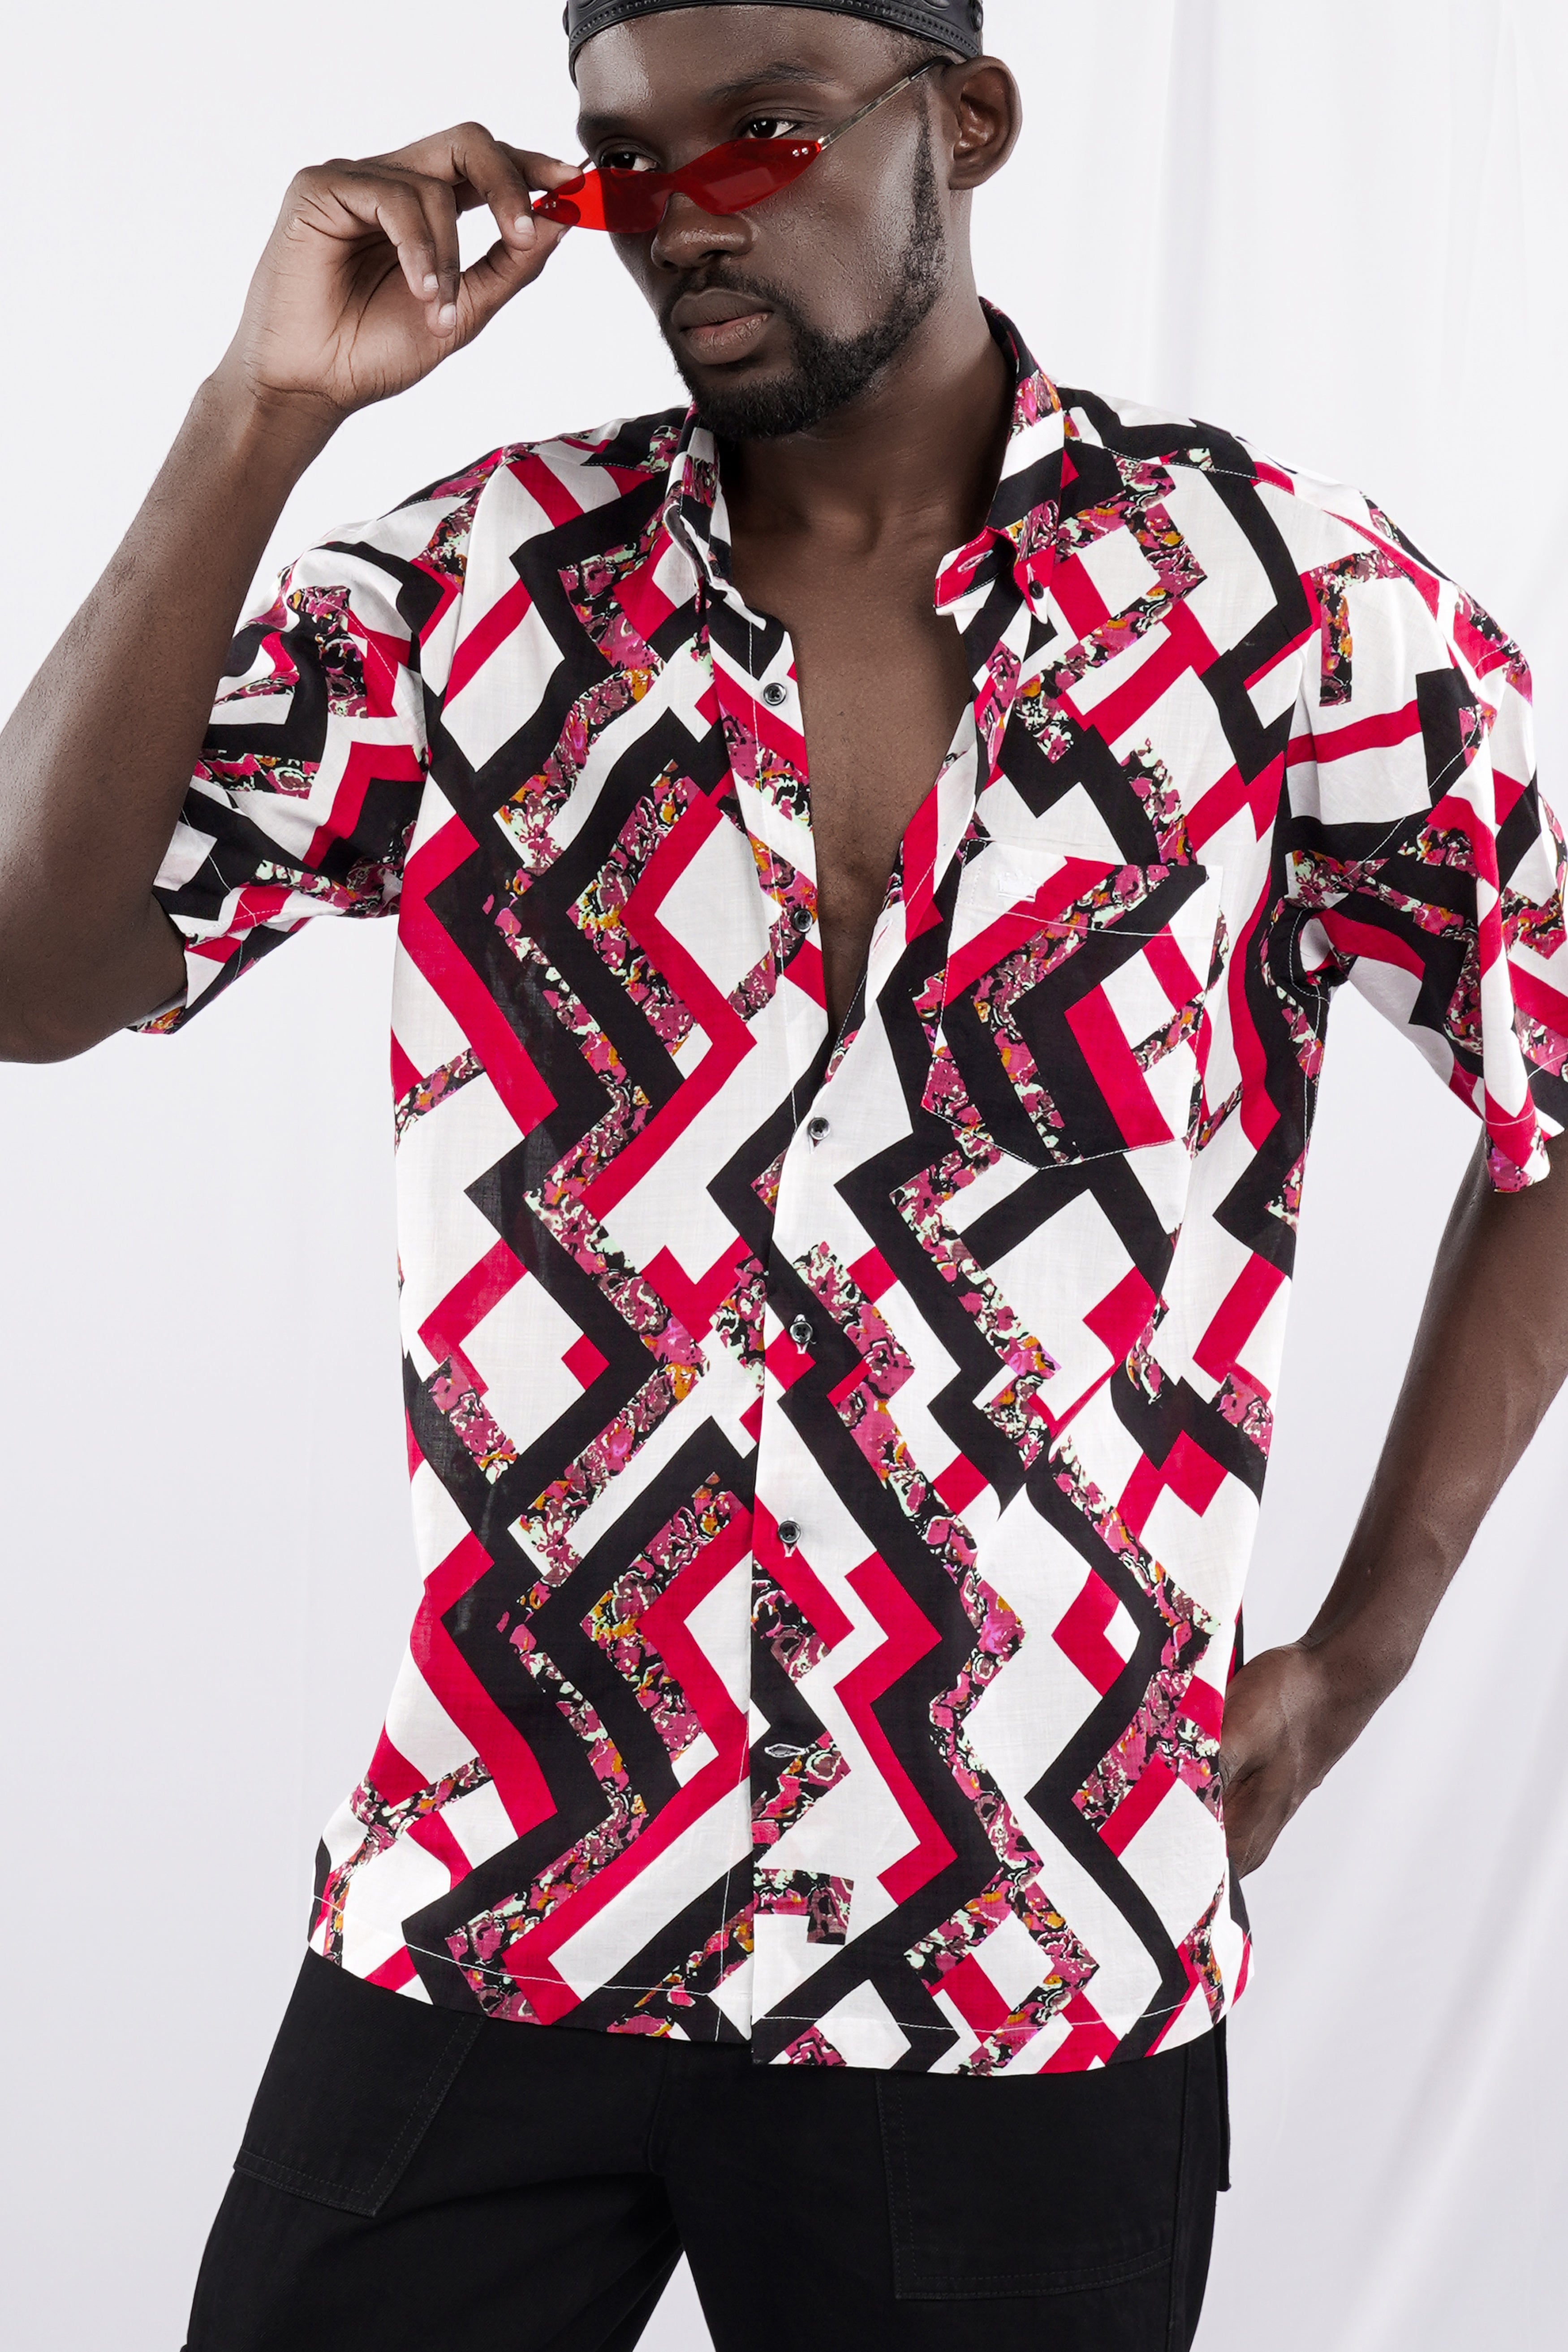 Cadmium Red with White and Black Funky Printed Lightweight Oversized Premium Cotton Shirt